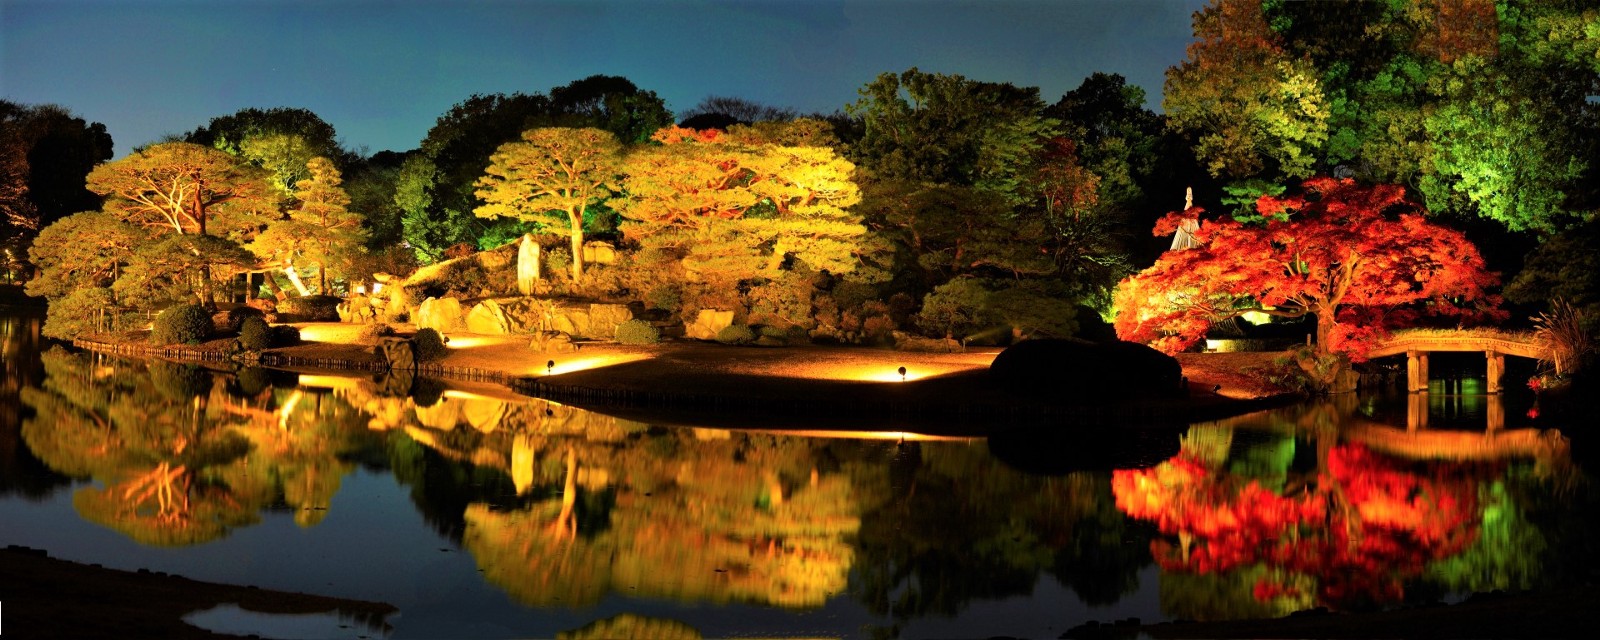 Illuminated traditional Japanese garden with autumn leaves 